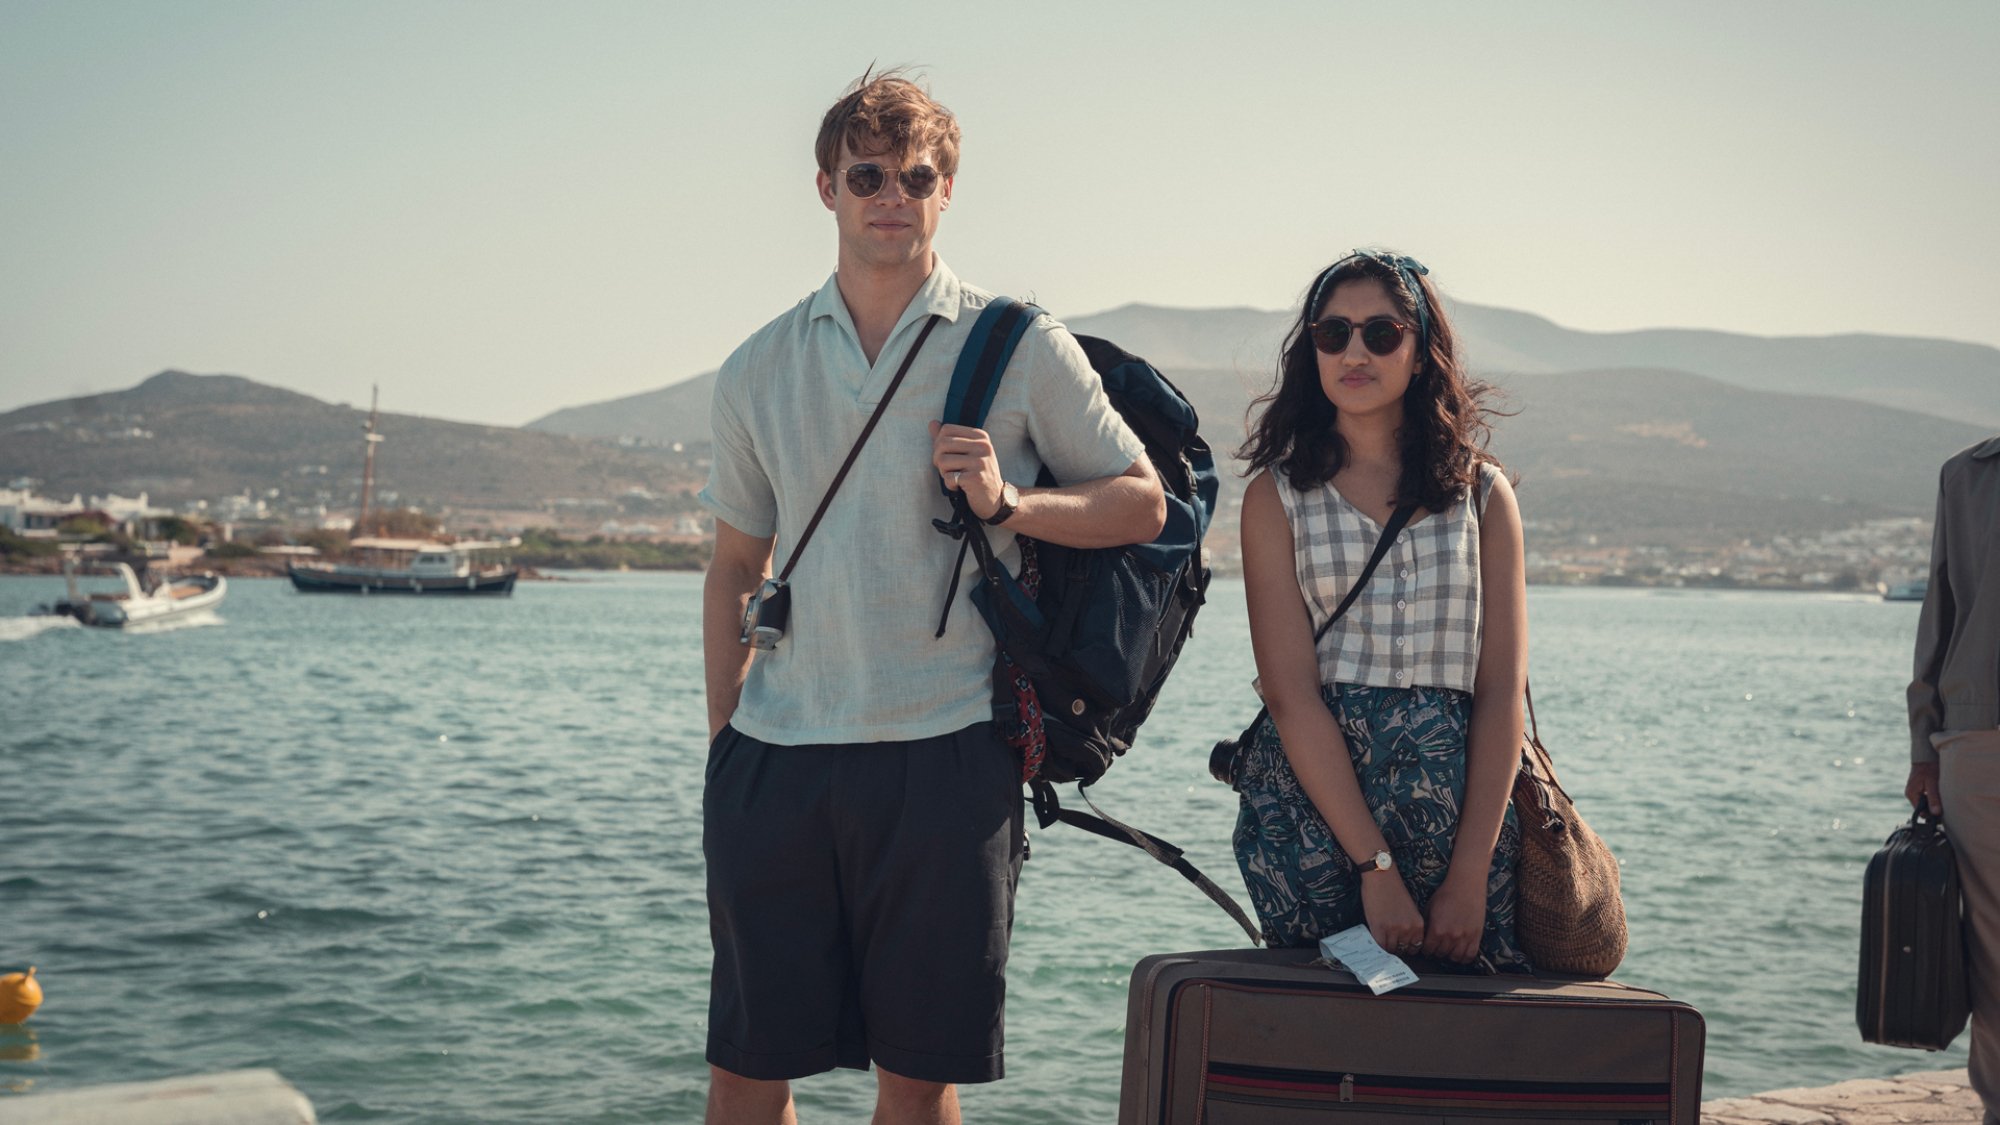 Two young people stand by the water in Greece holding their travel bags.